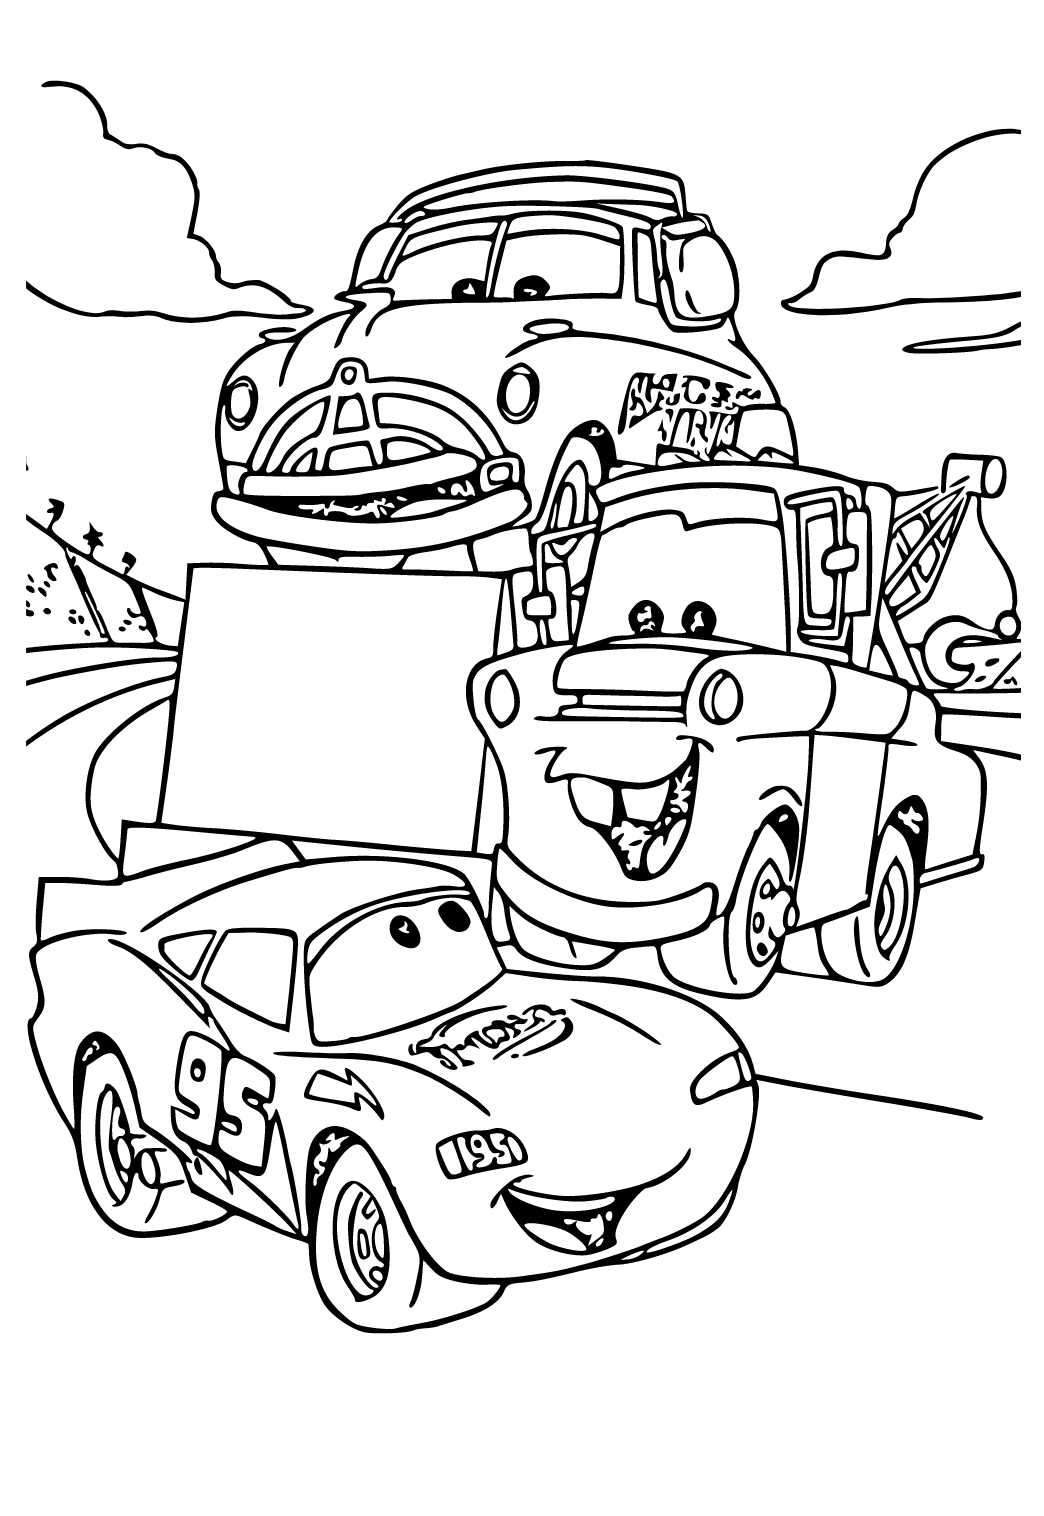 Free printable lightning mcqueen characters coloring page for adults and kids